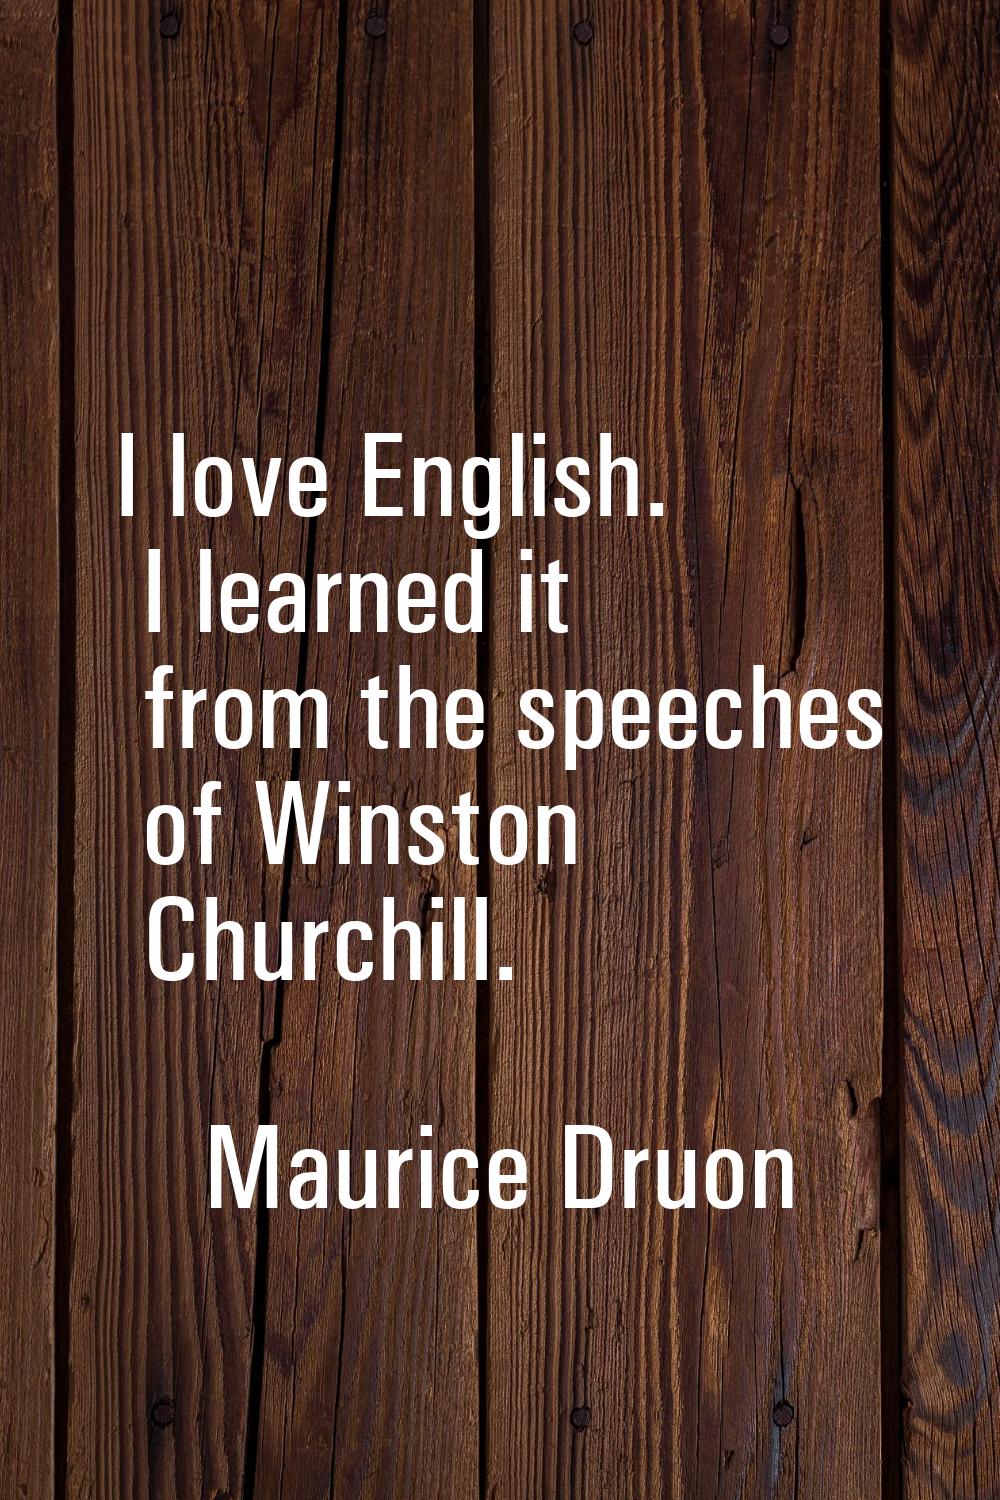 I love English. I learned it from the speeches of Winston Churchill.